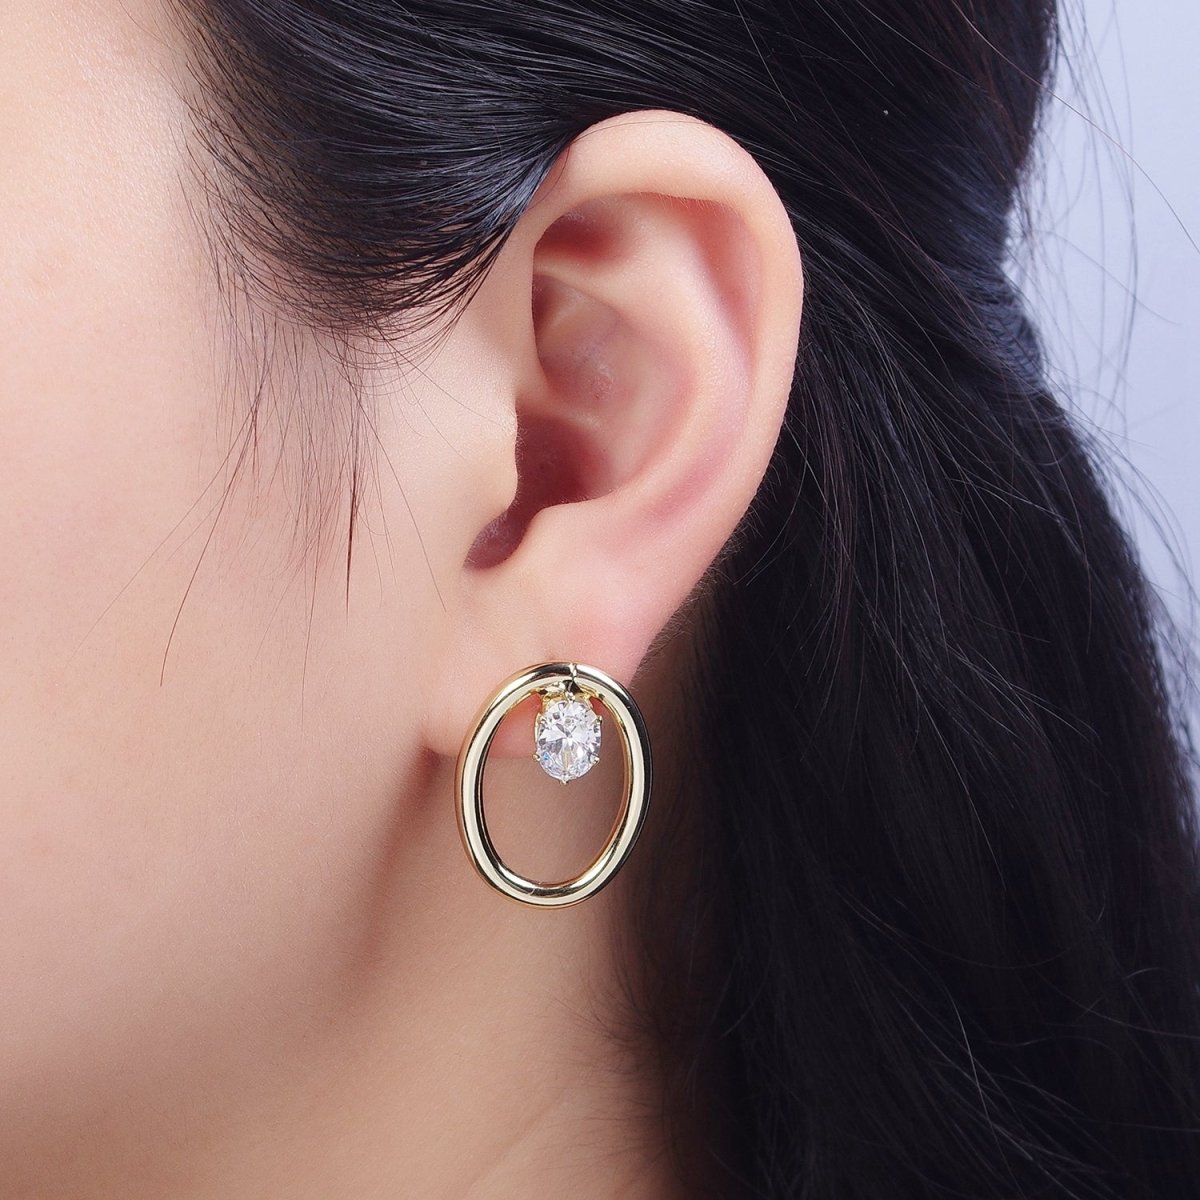 14K Gold Filled Minimalist Stud Earring Light Gold Round Circle with Dainty Cubic Zirconia Crystal, Perfect for Everyday Wear or Gift | X914 - DLUXCA